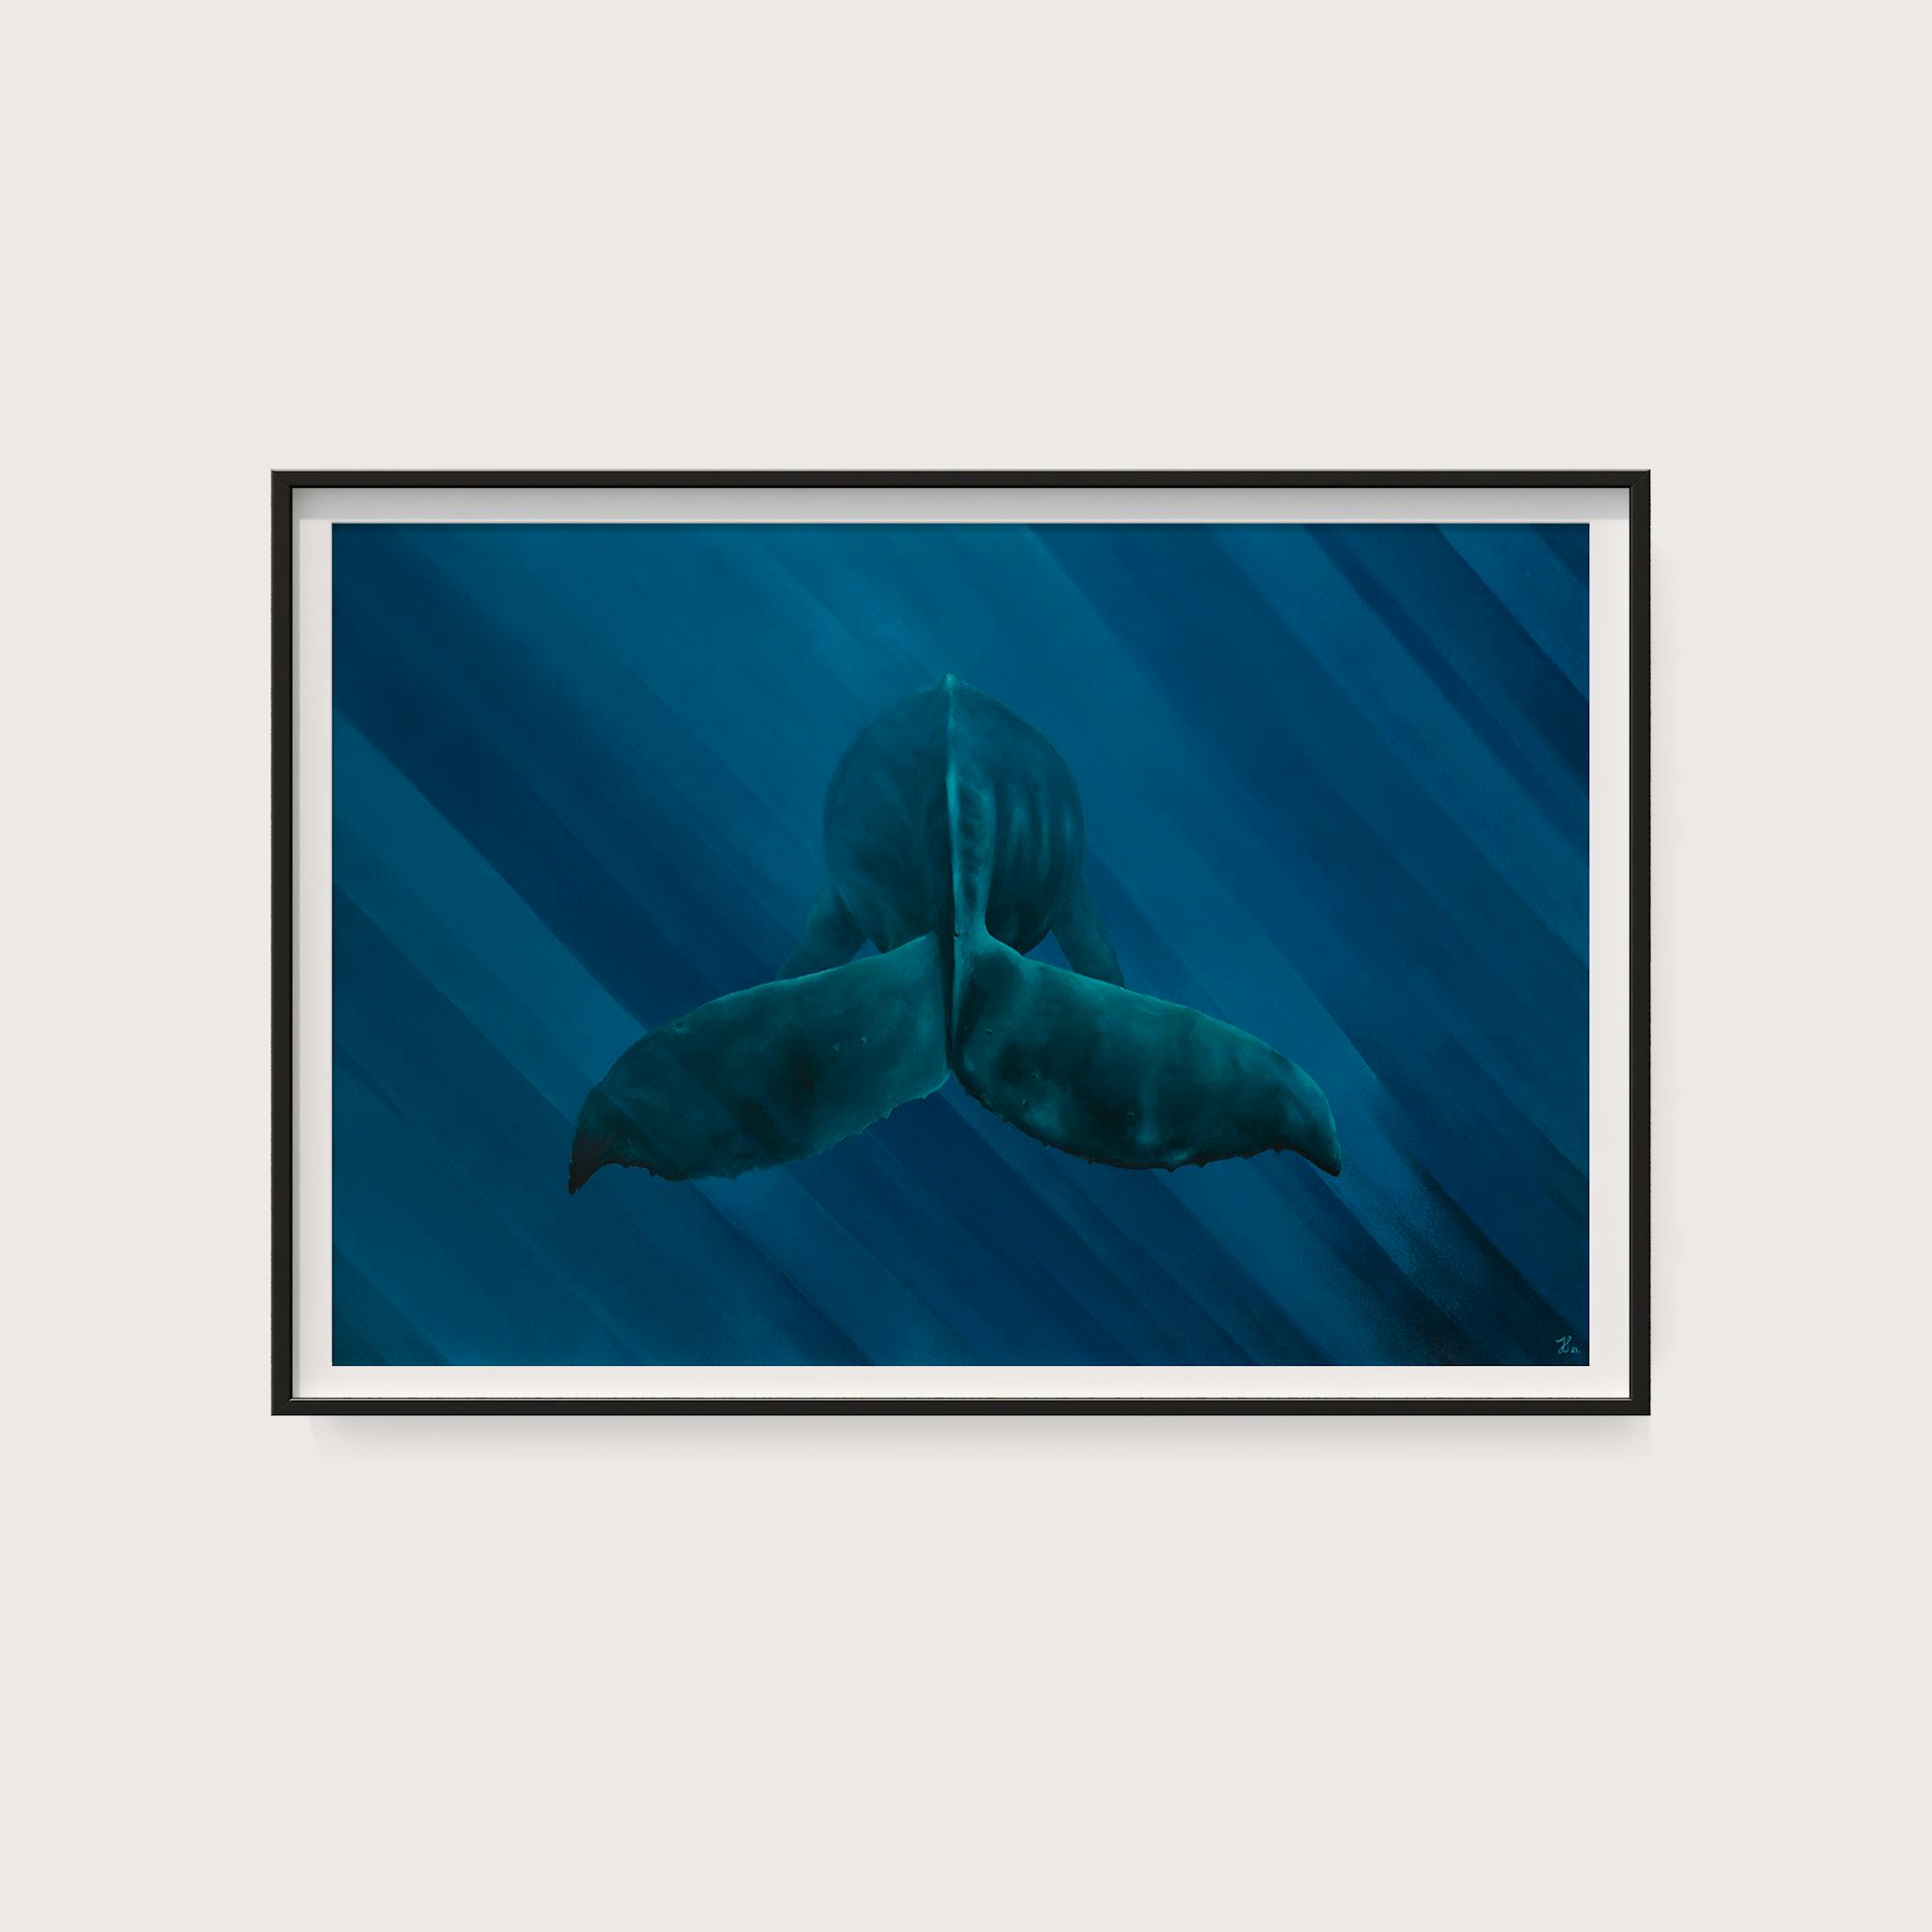 Framed high quality print of a humpback whale tale floating in the ocean.